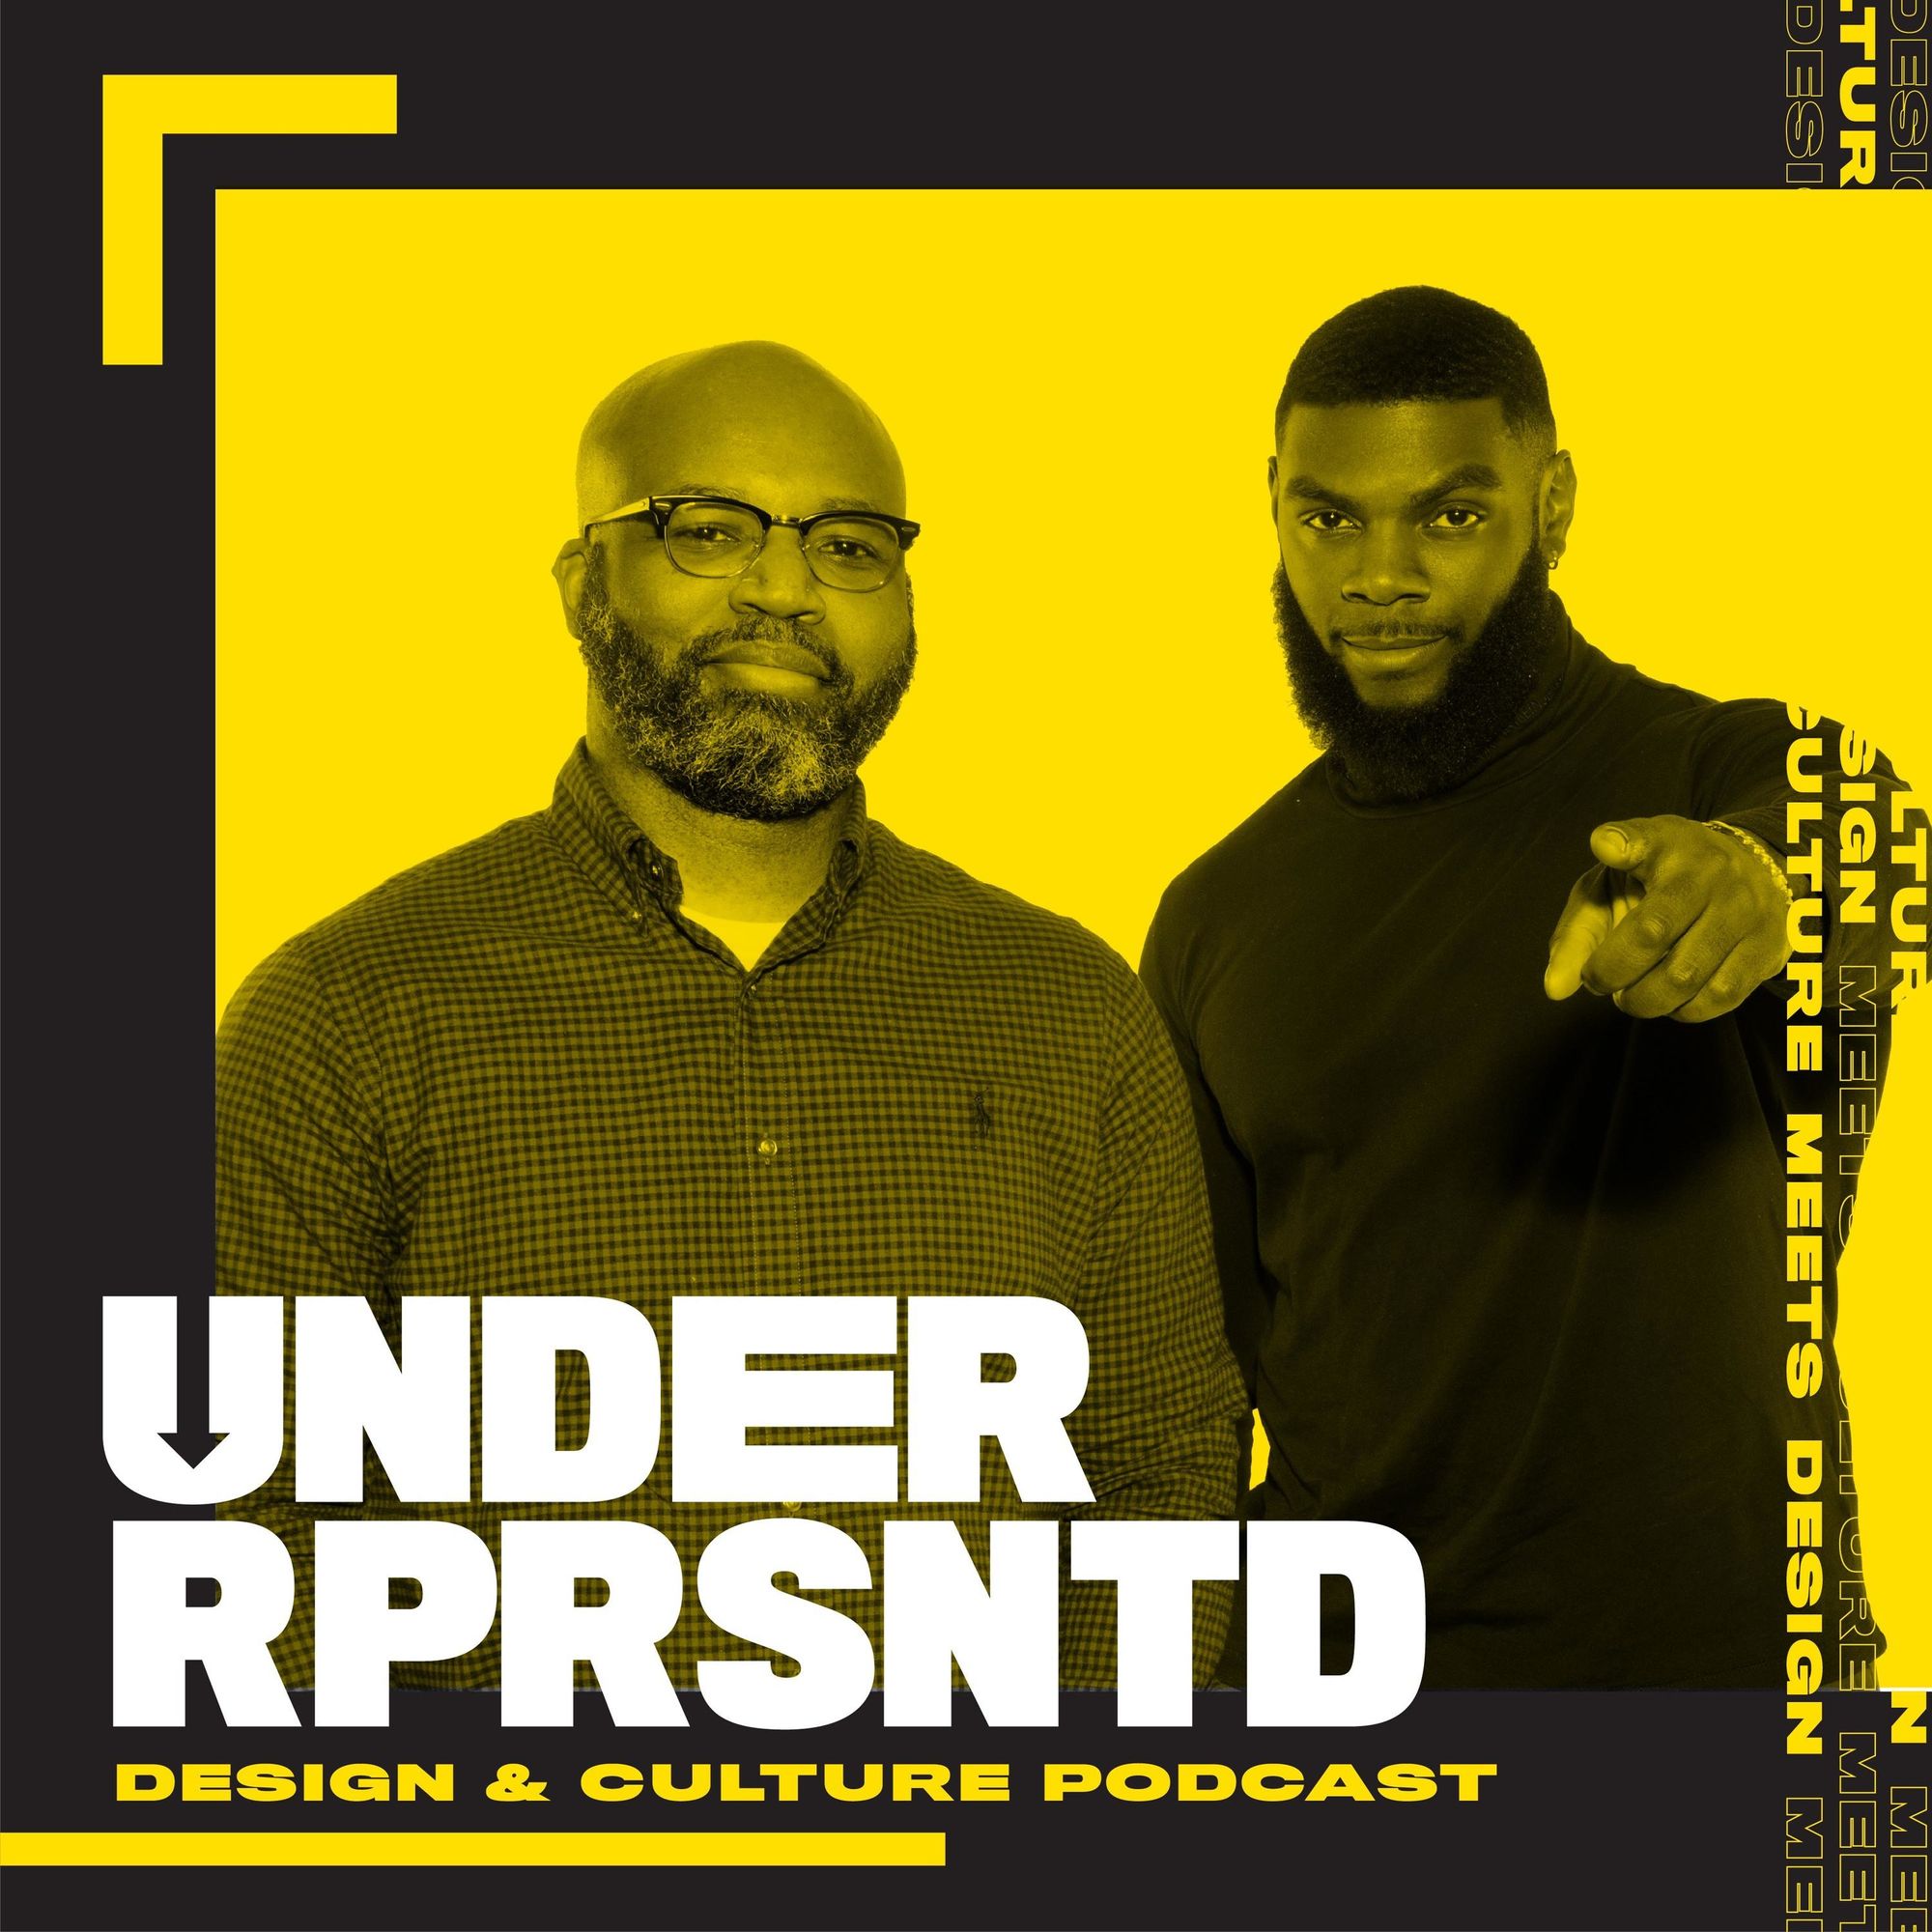 Under Represented Podcast